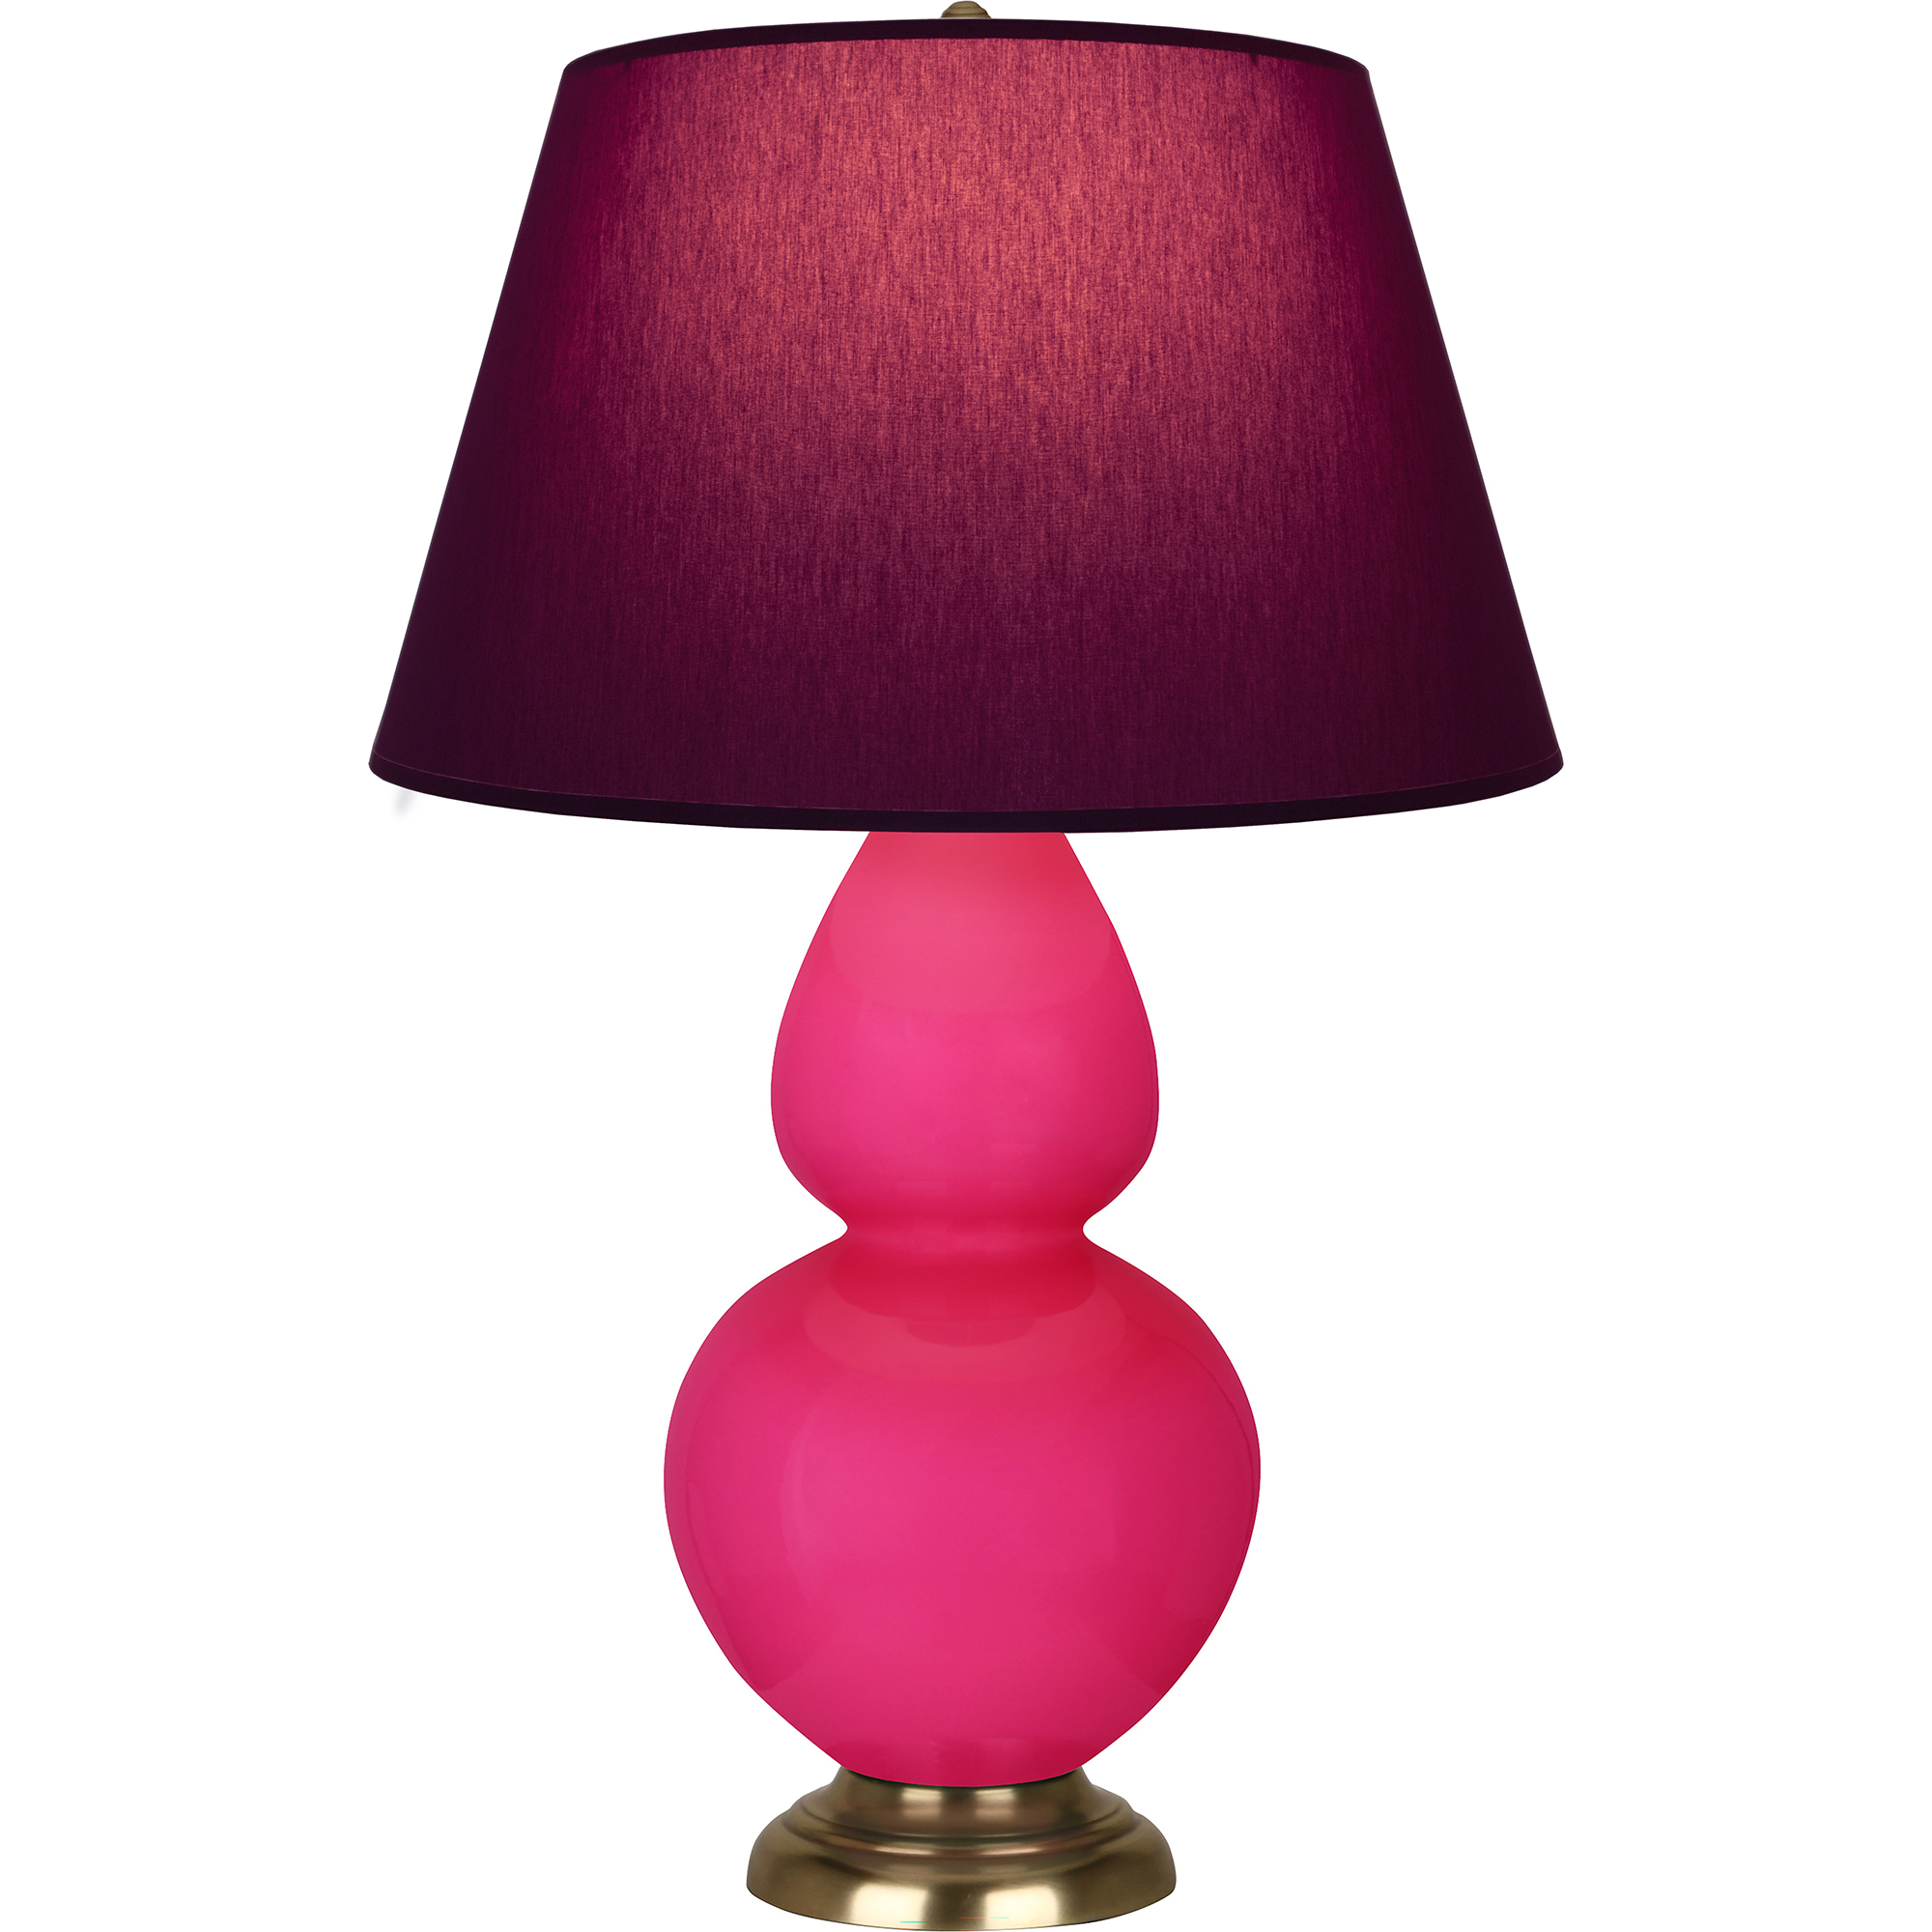 Double Gourd Table Lamp Style #RZ20P